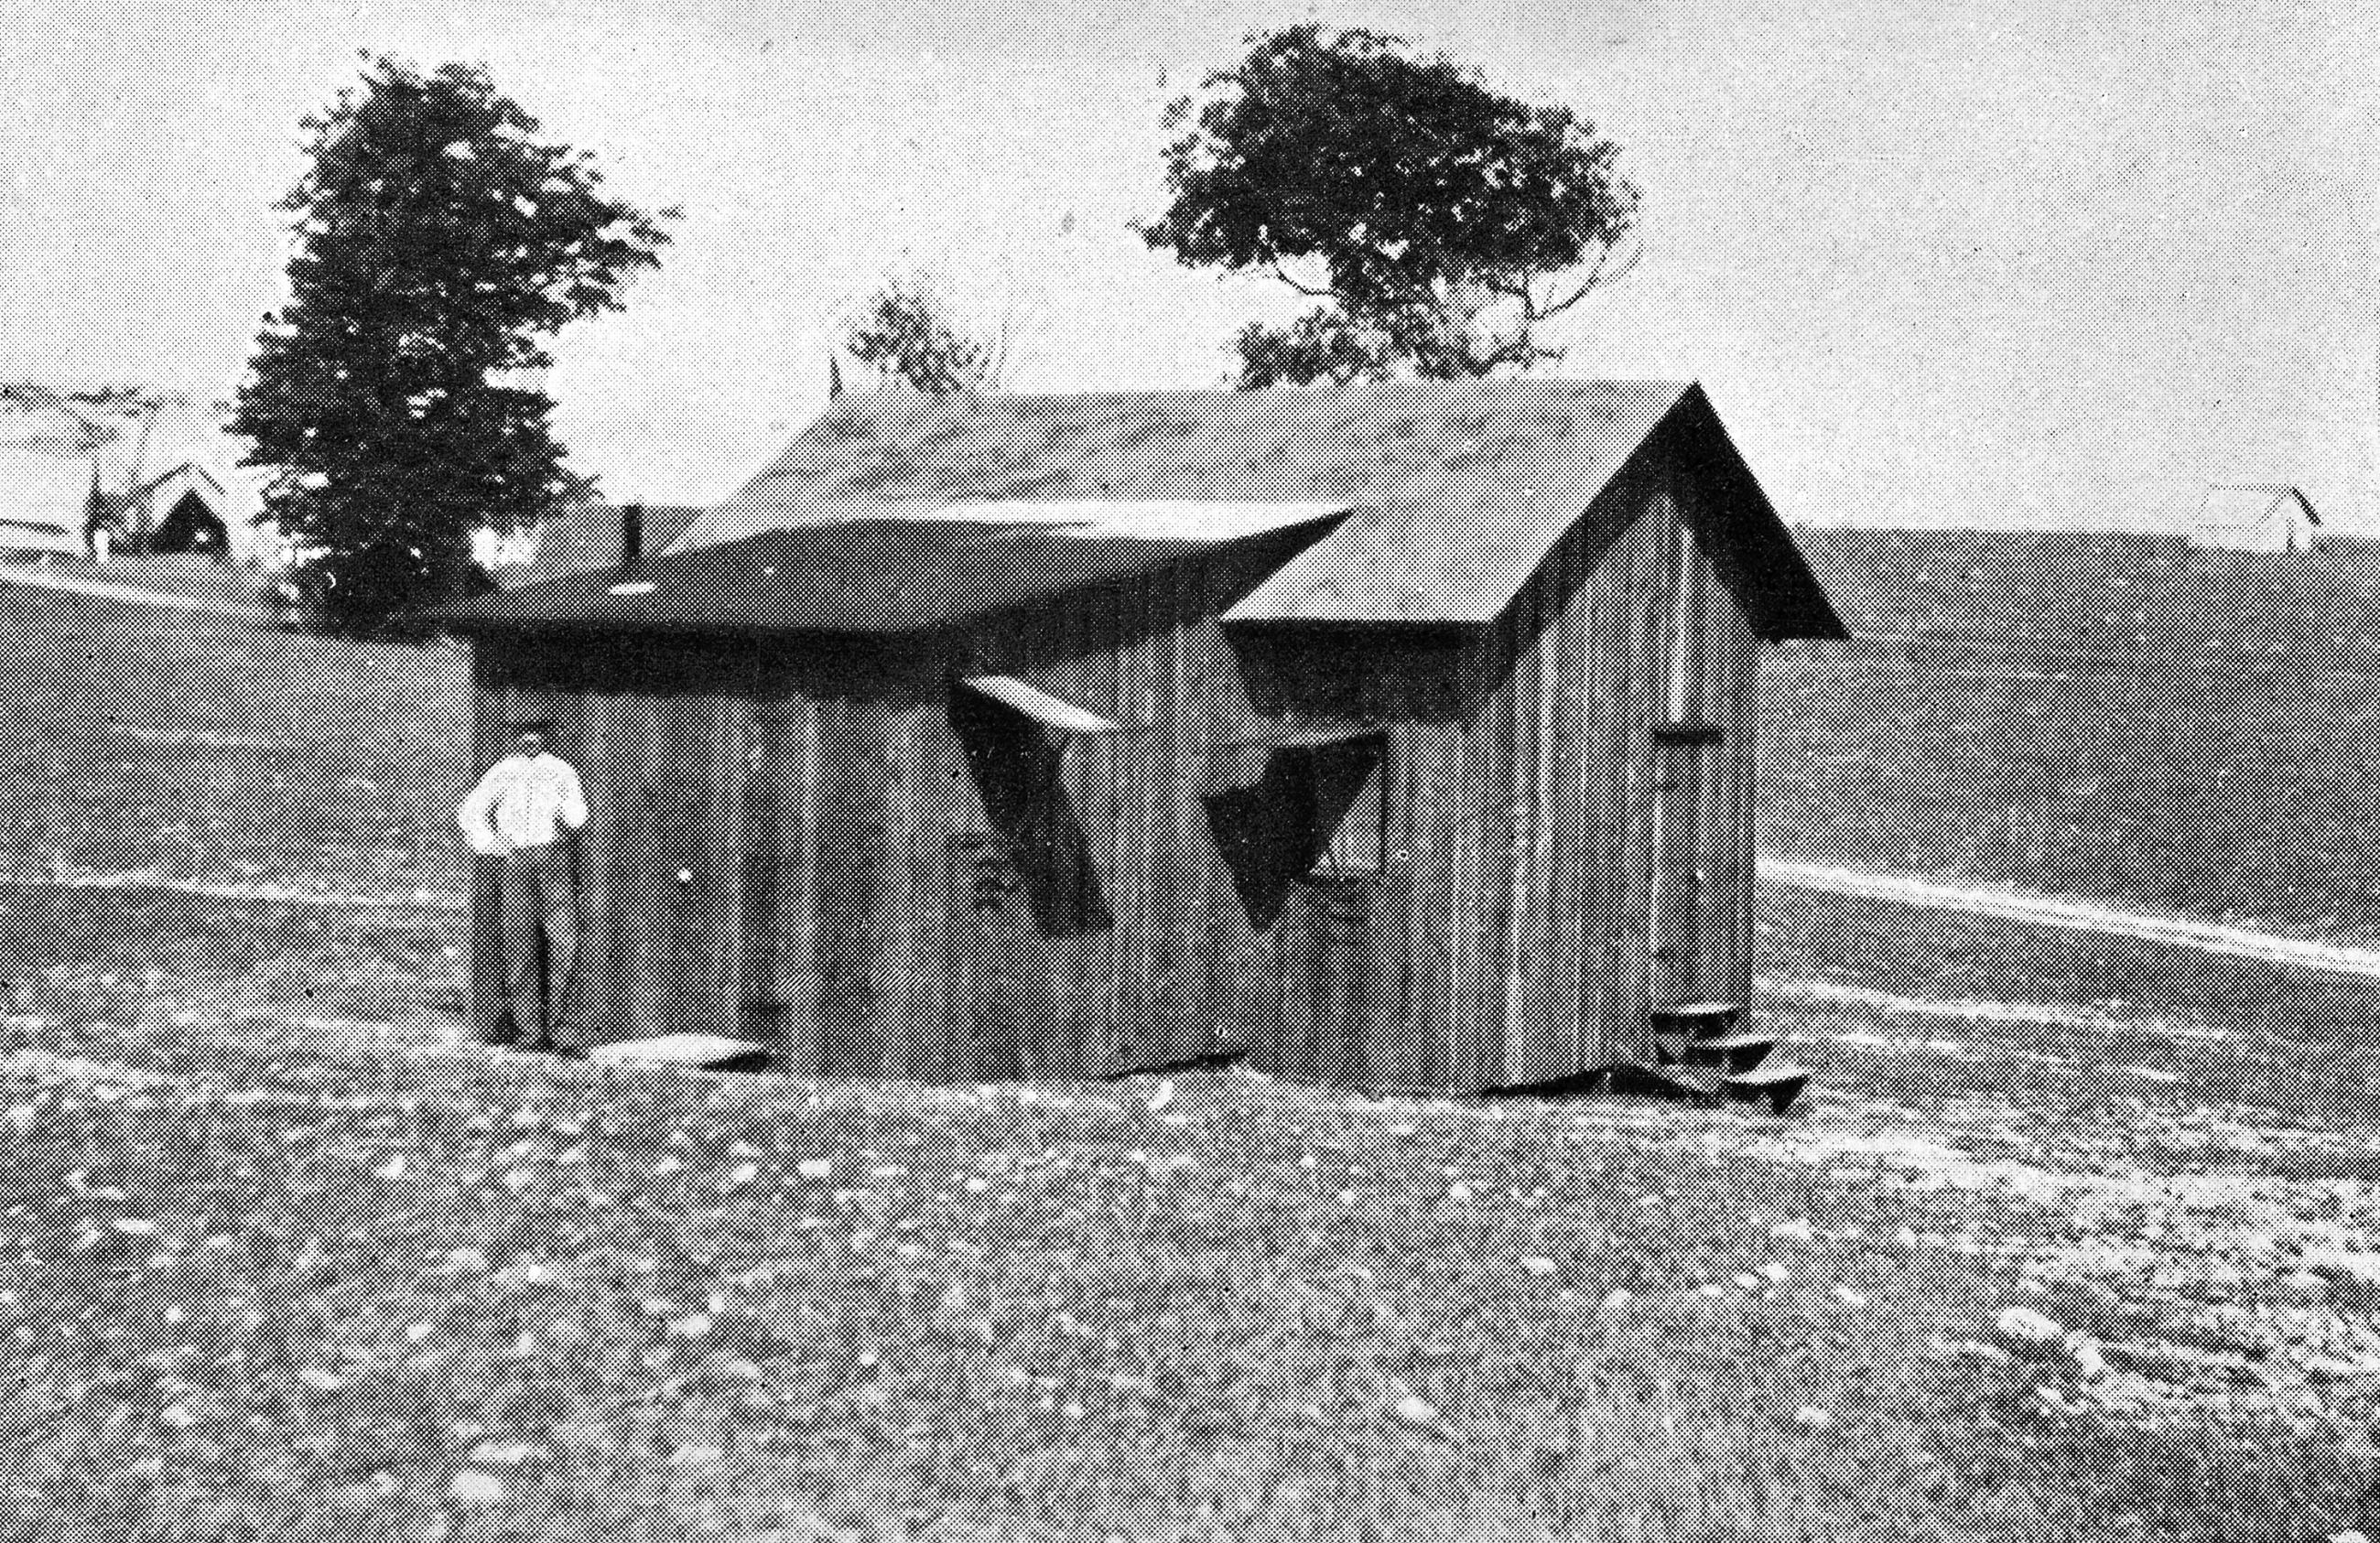 The historic photo shows a wooden hut of a building in a desolate setting with a man standing out front. 